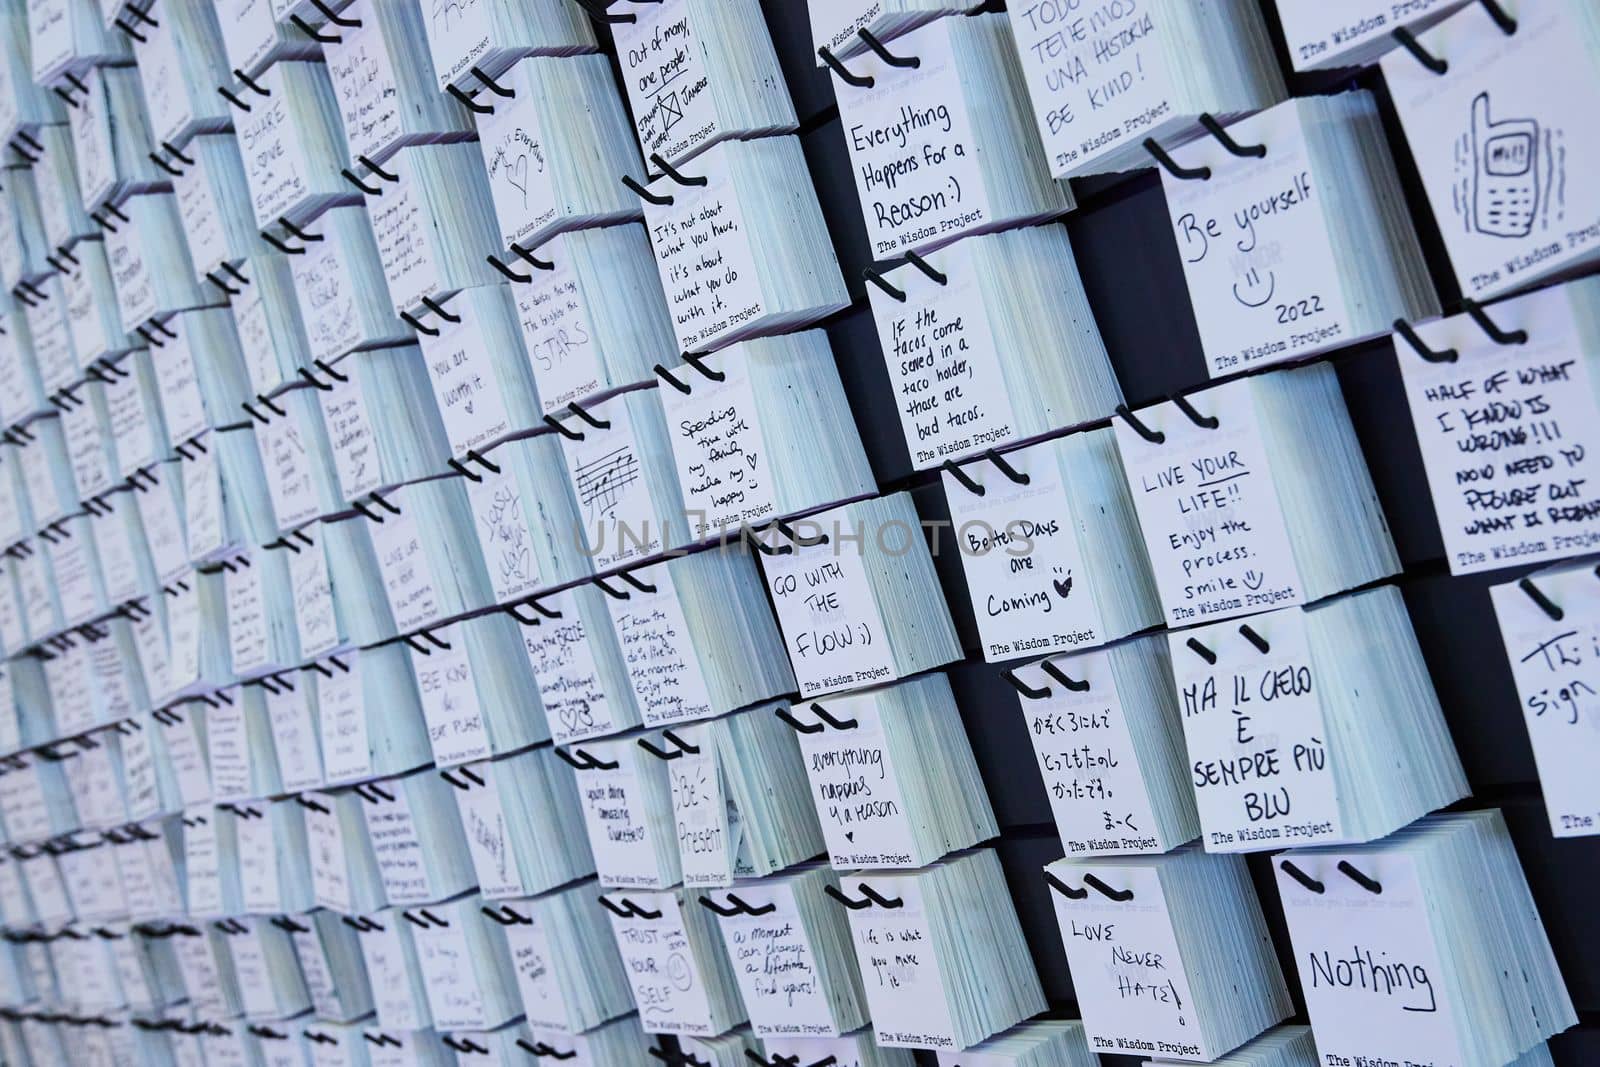 Wall covered in handwritten notes for facts about life from random people by njproductions